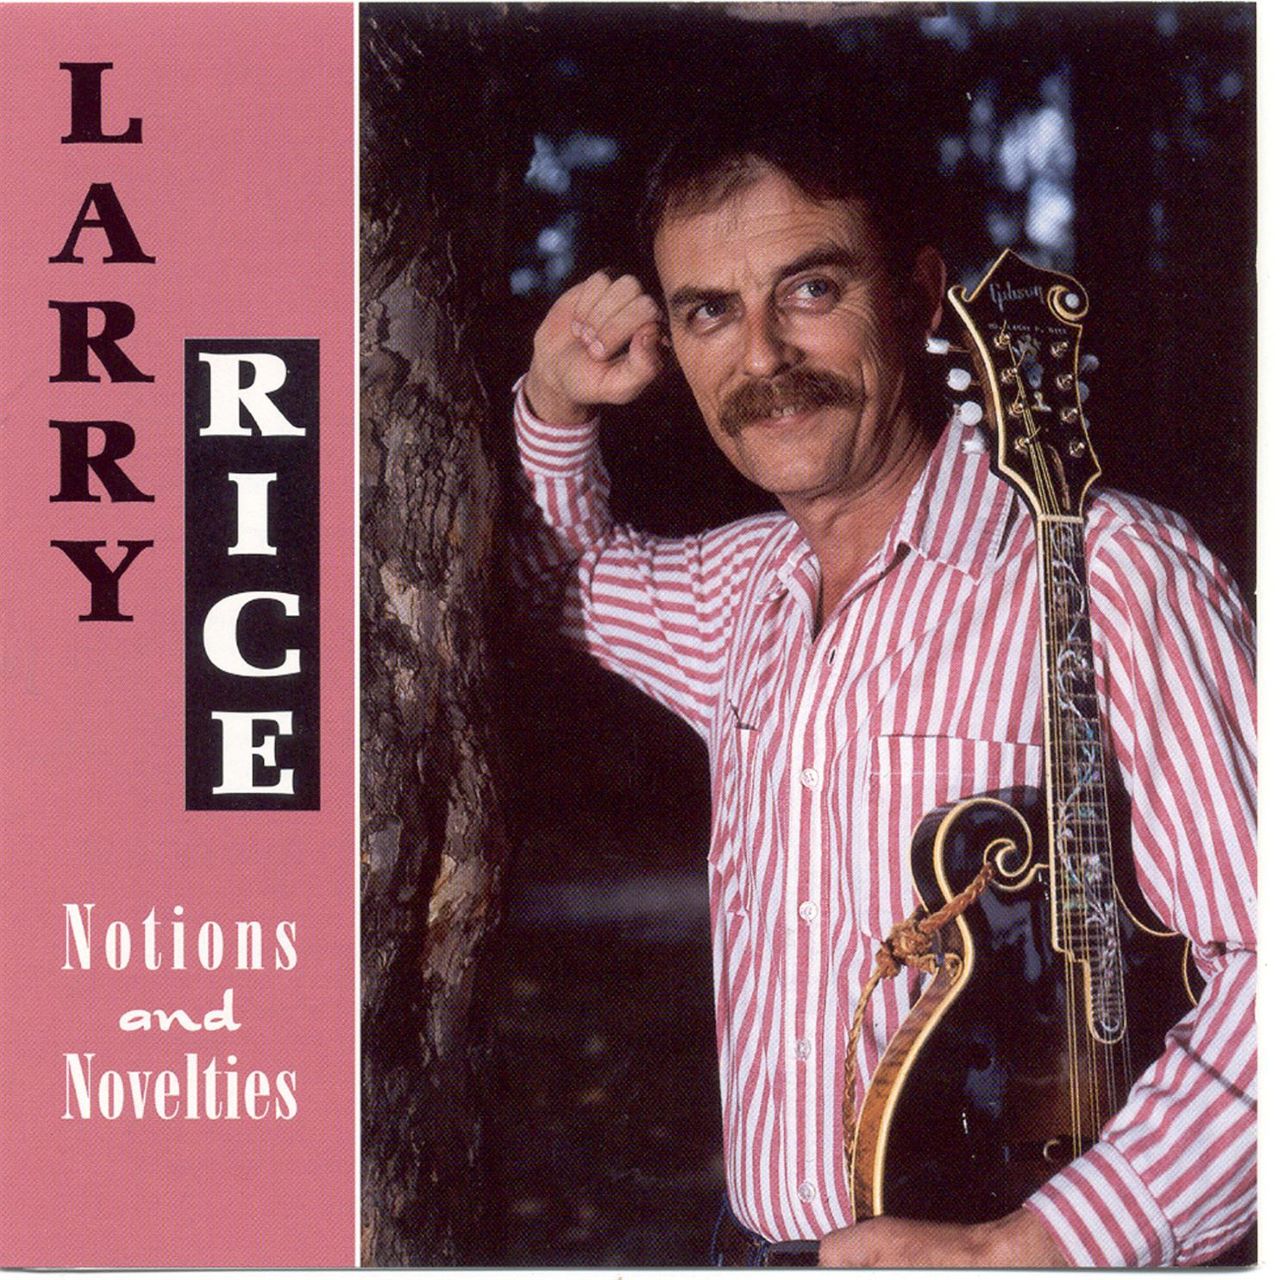 Larry Rice - Notions And Novelties cover album